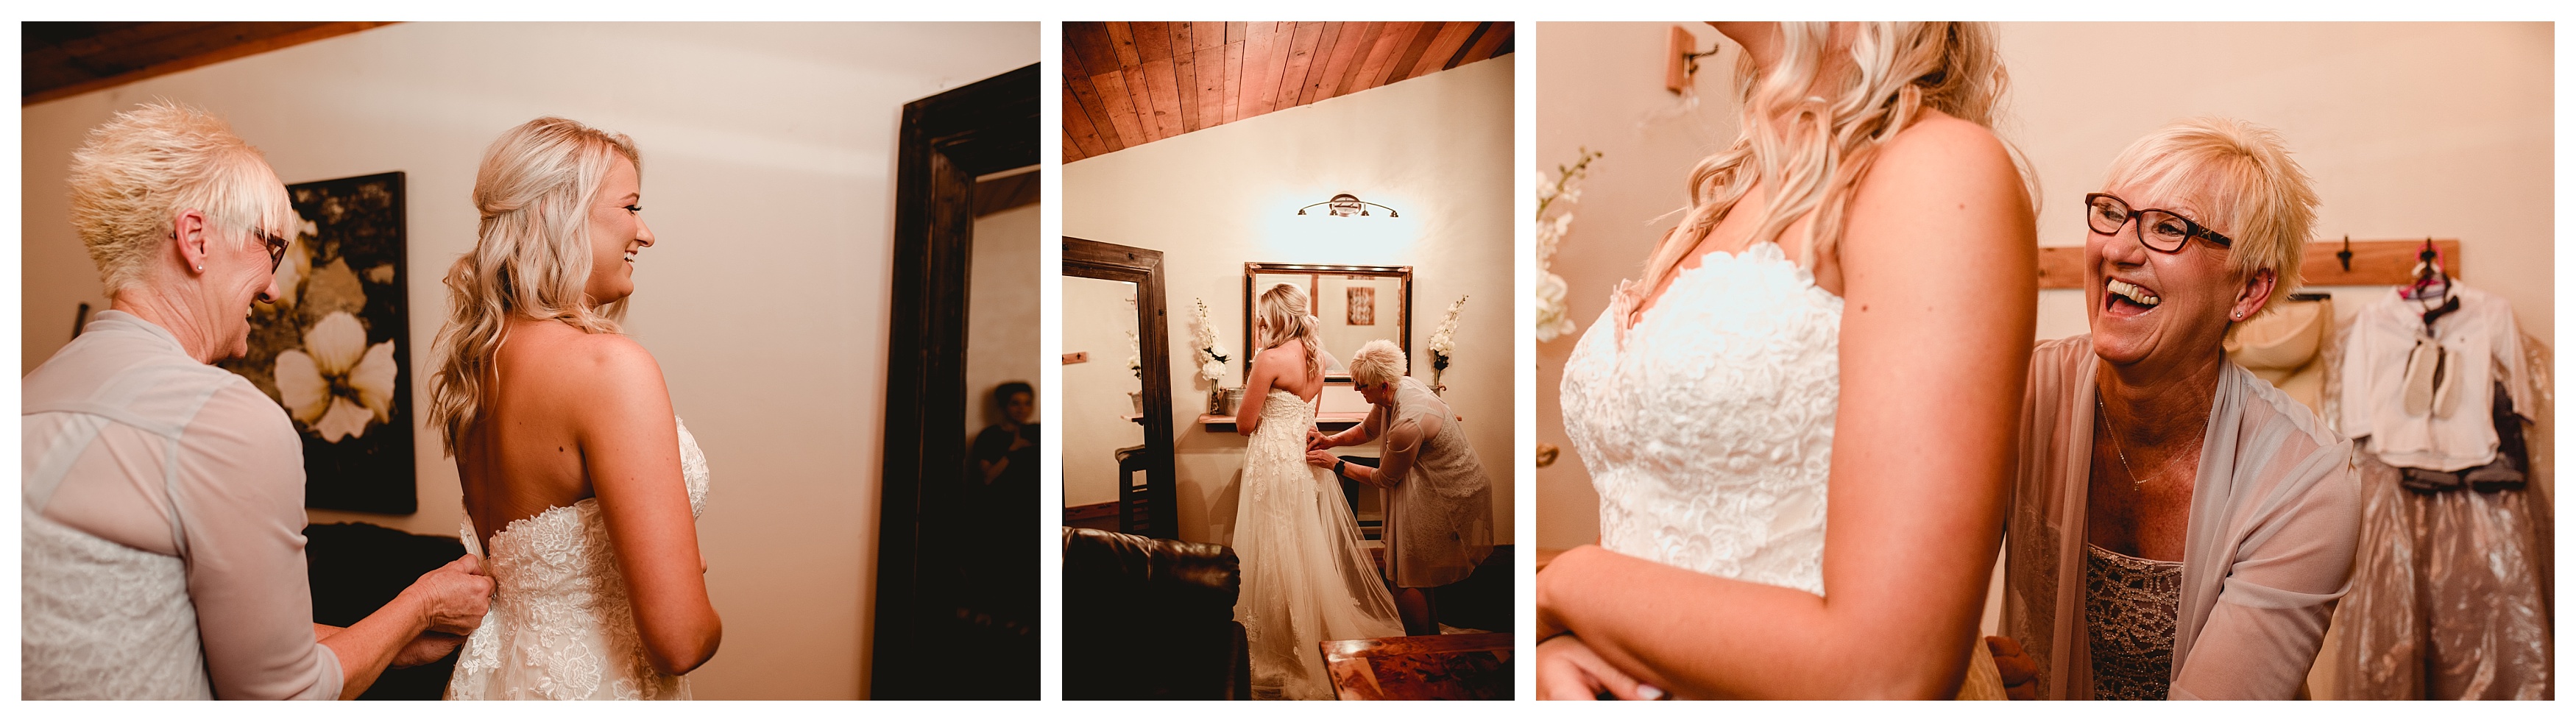 Bride gets ready in bridal suite at Seven Hills Farm, Trenton, FL. Shelly Williams Photography